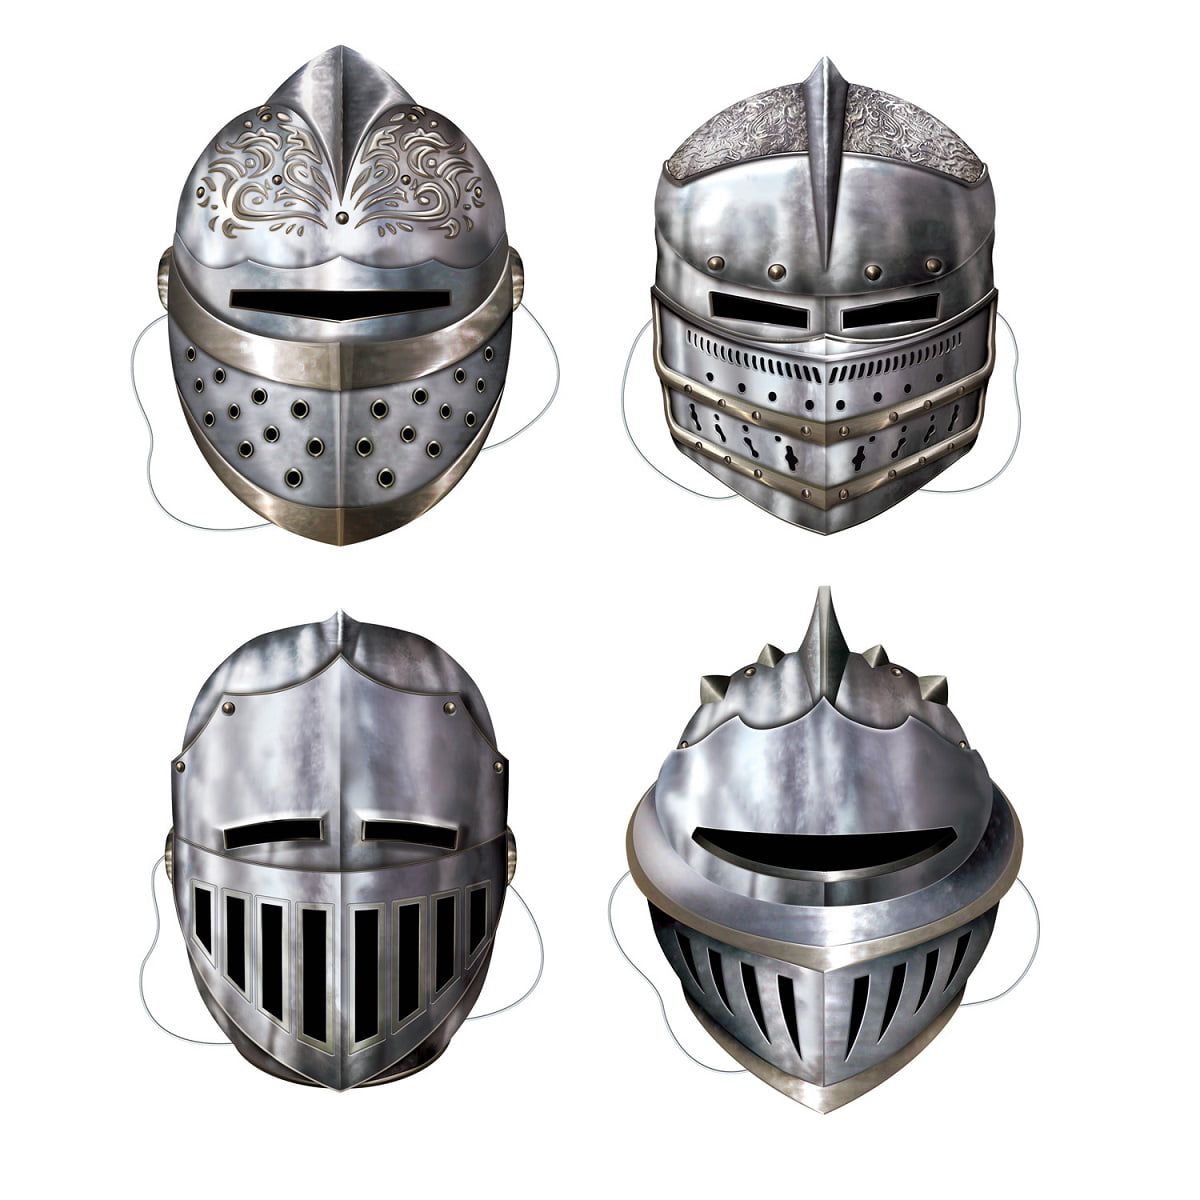 Party Central Club of 12 Silver Noble Knight In Shining Halloween Masks - One Size -